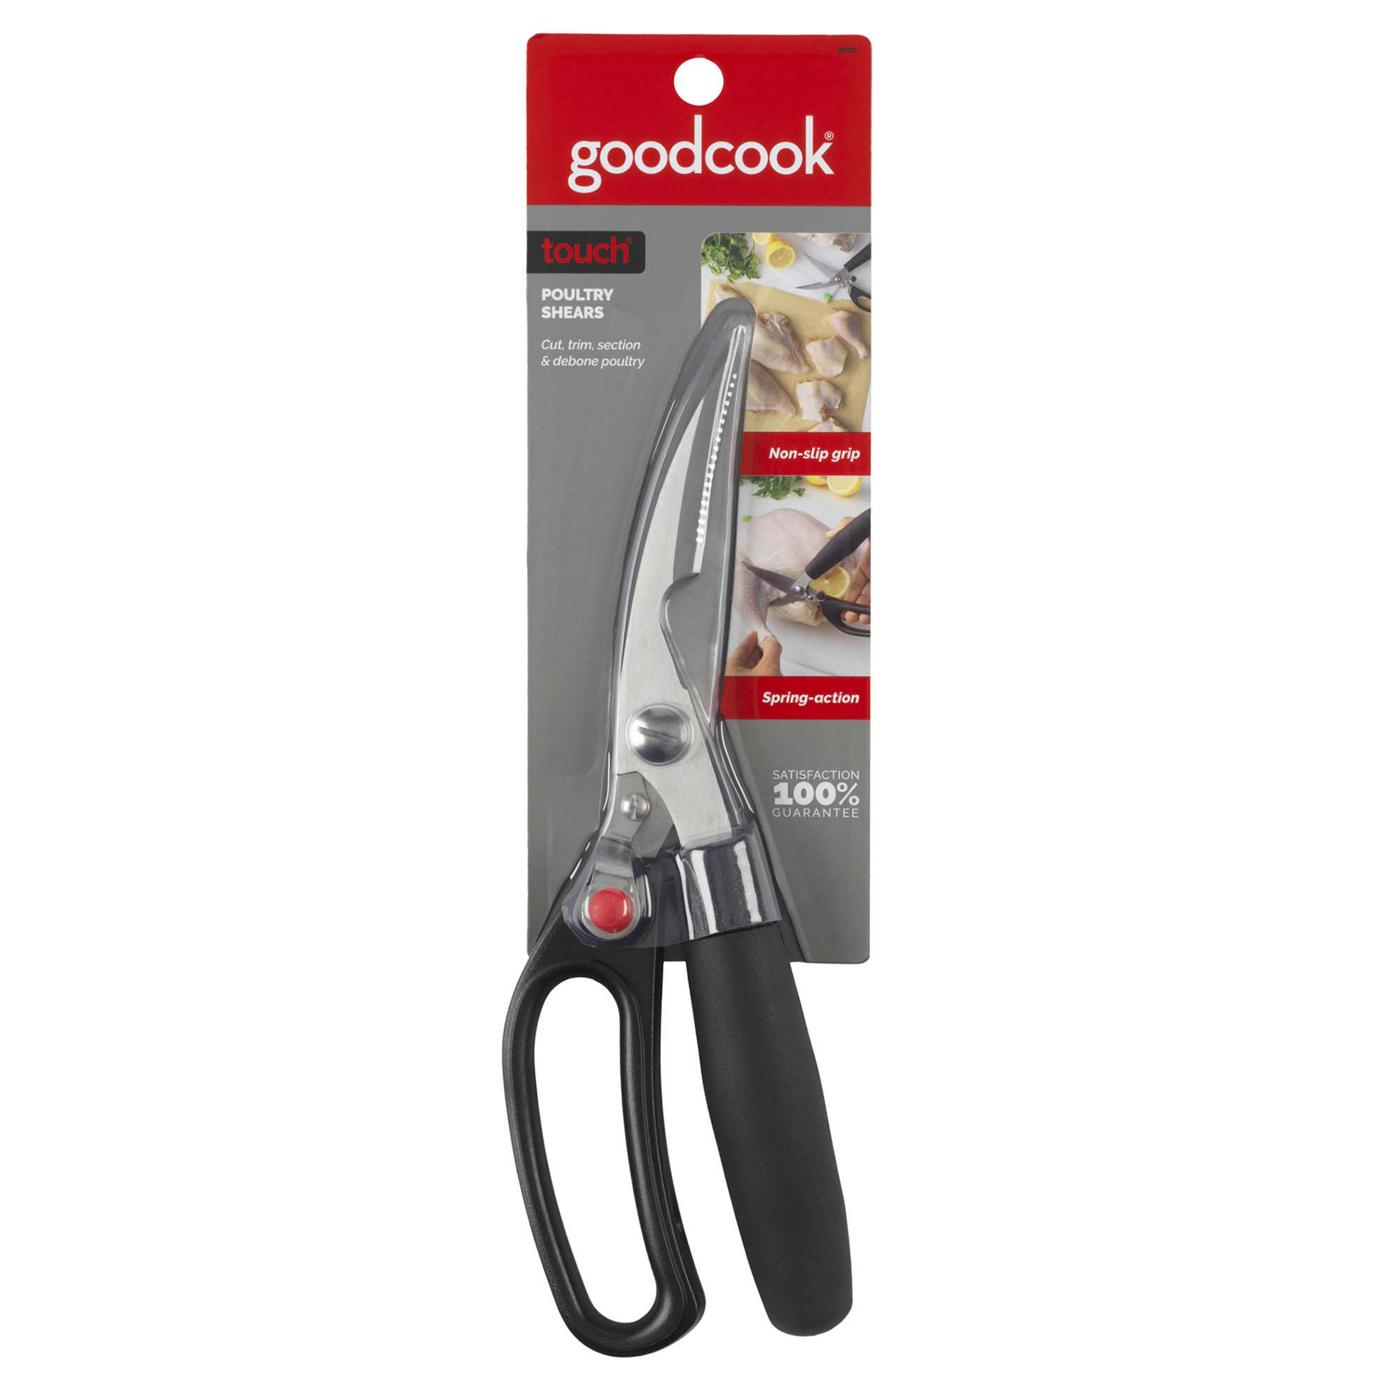 GoodCook Touch Poultry Shears; image 1 of 4